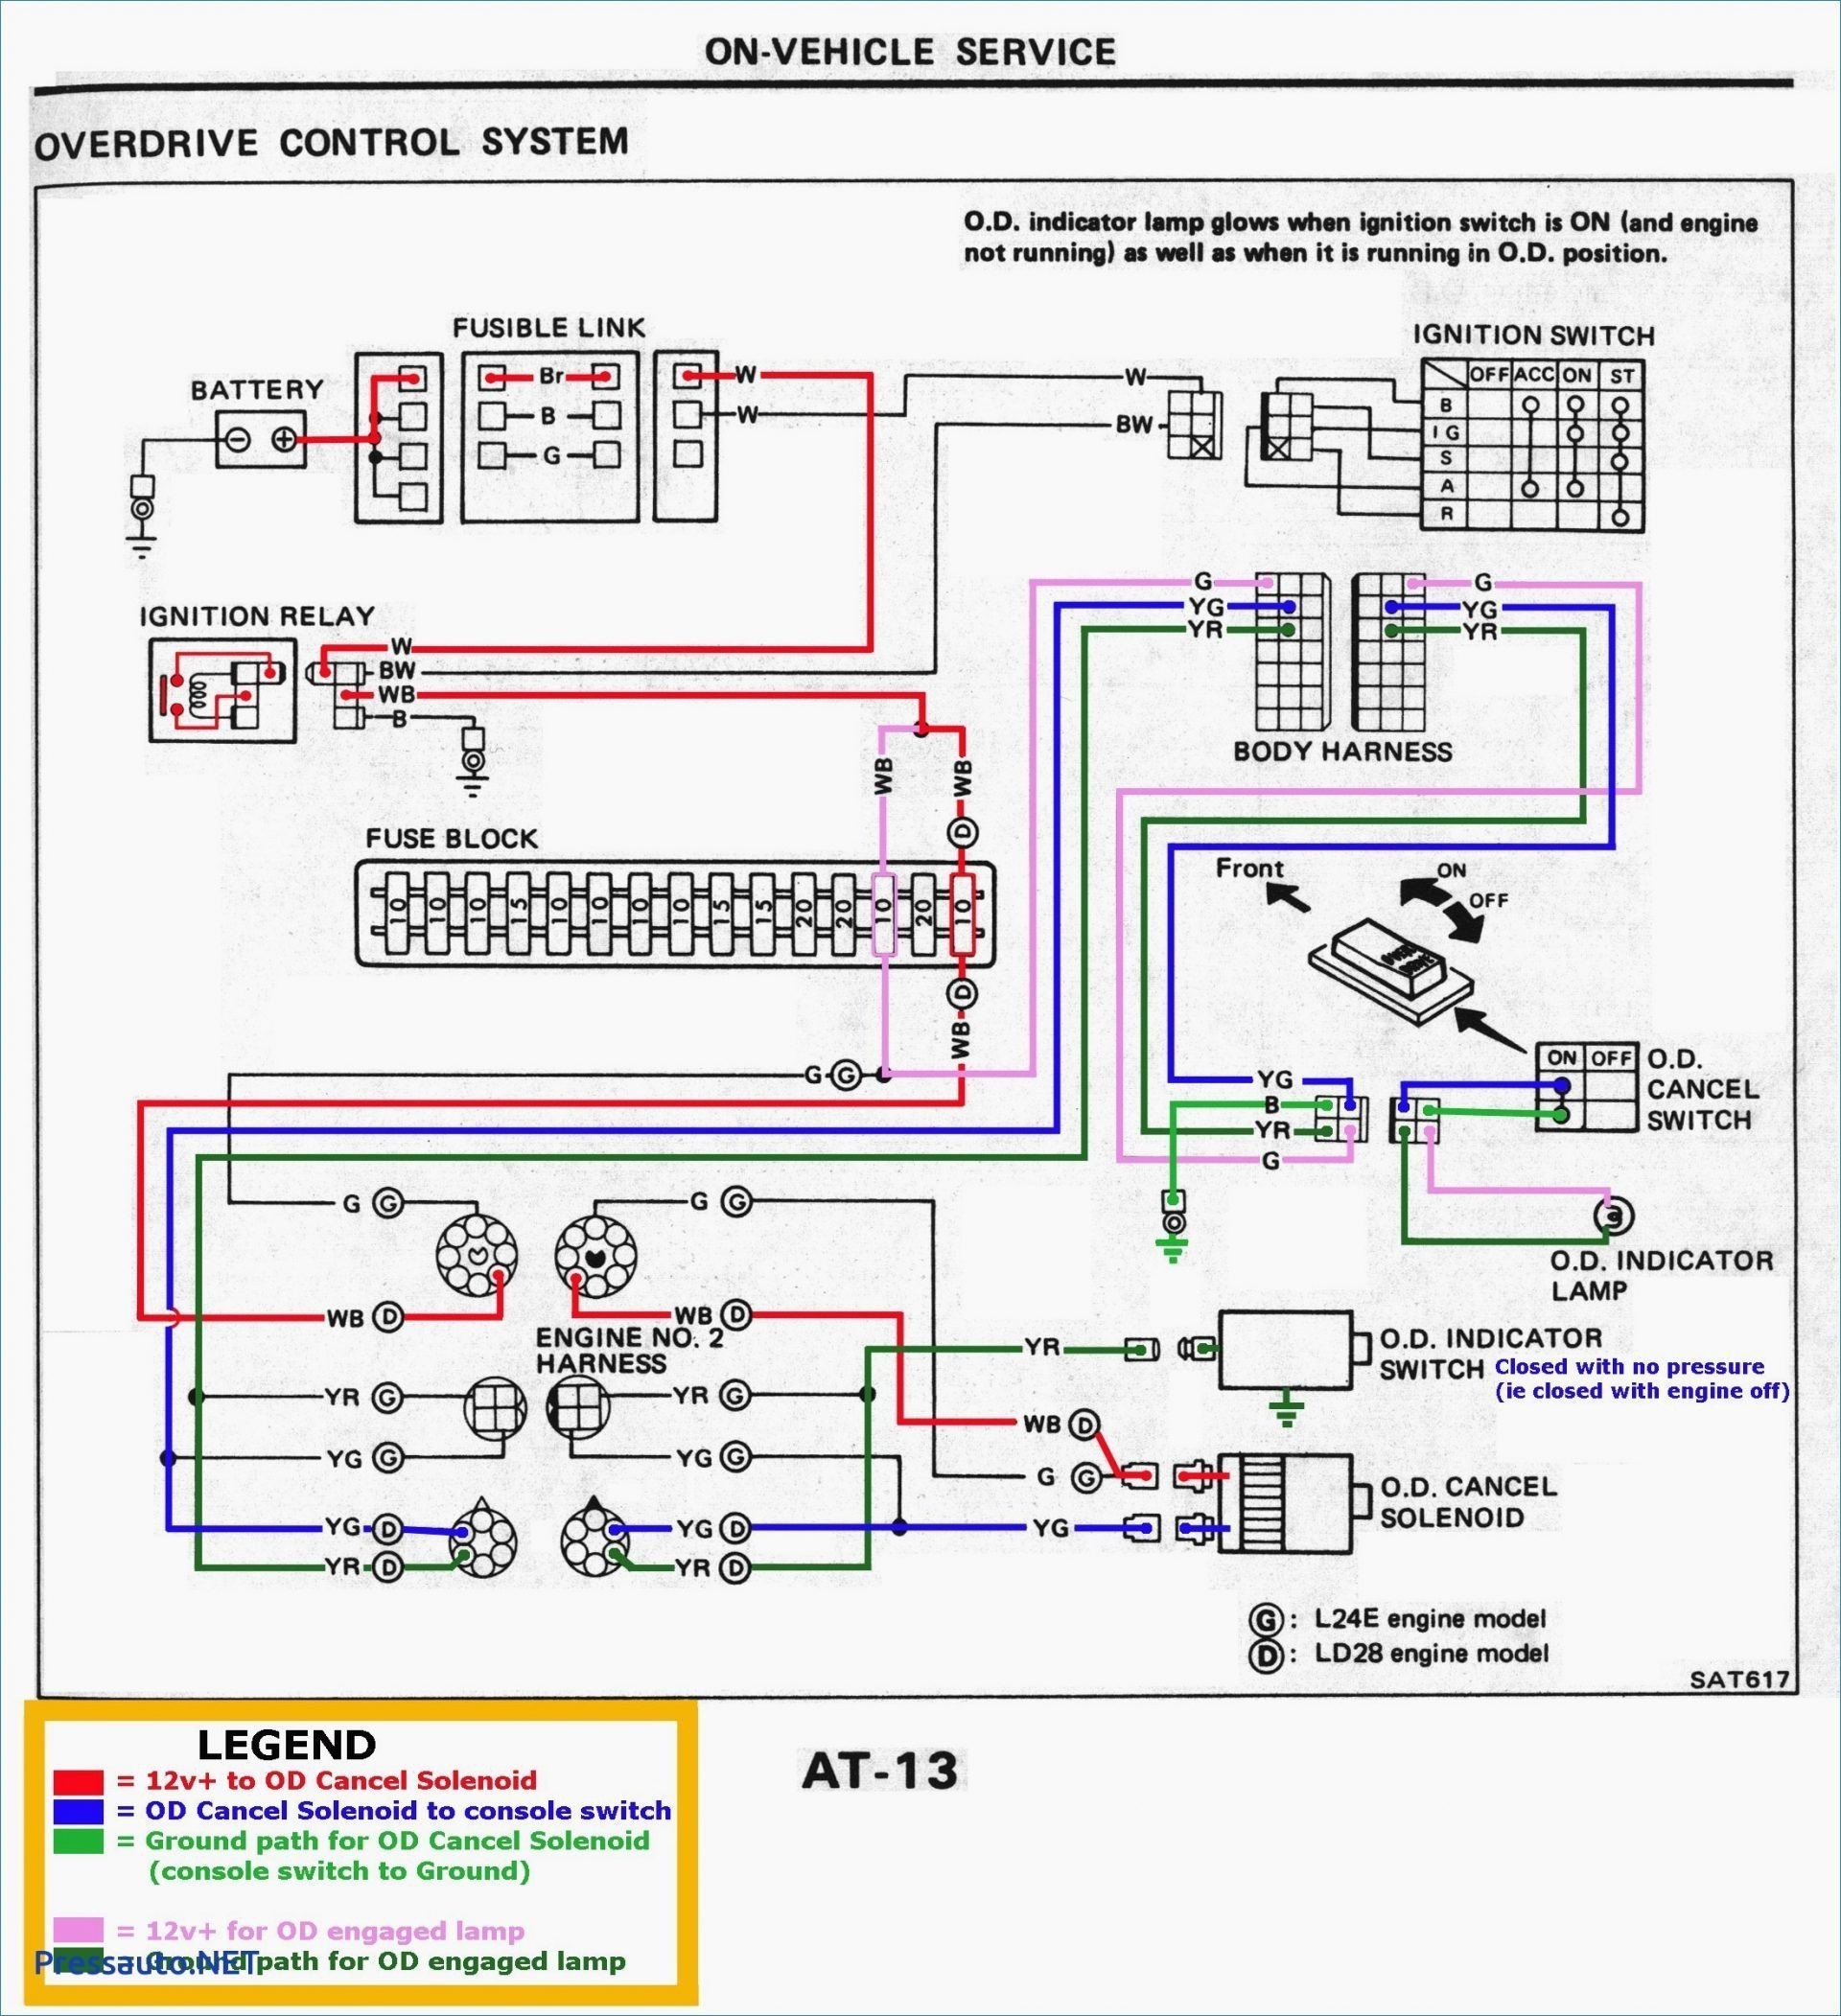 magneto ignition system wiring diagram refrence new wiring diagram rh yourproducthere co Simple Ignition Wiring Diagram Electronic Ignition Wiring Diagram